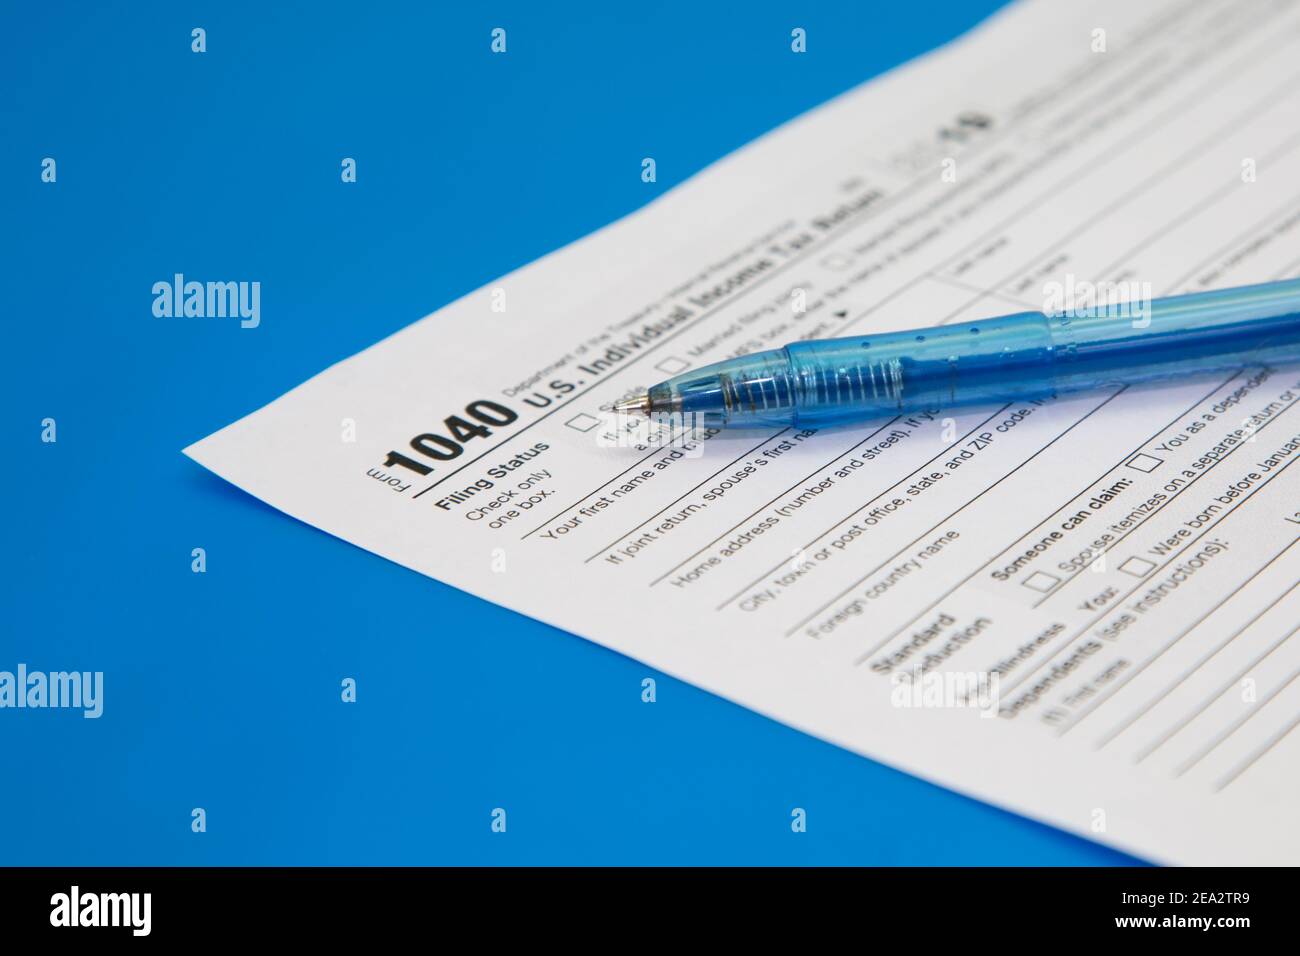 Tax return close-up on a blue background. Blue pen on tax form 1040. Selective focus Stock Photo